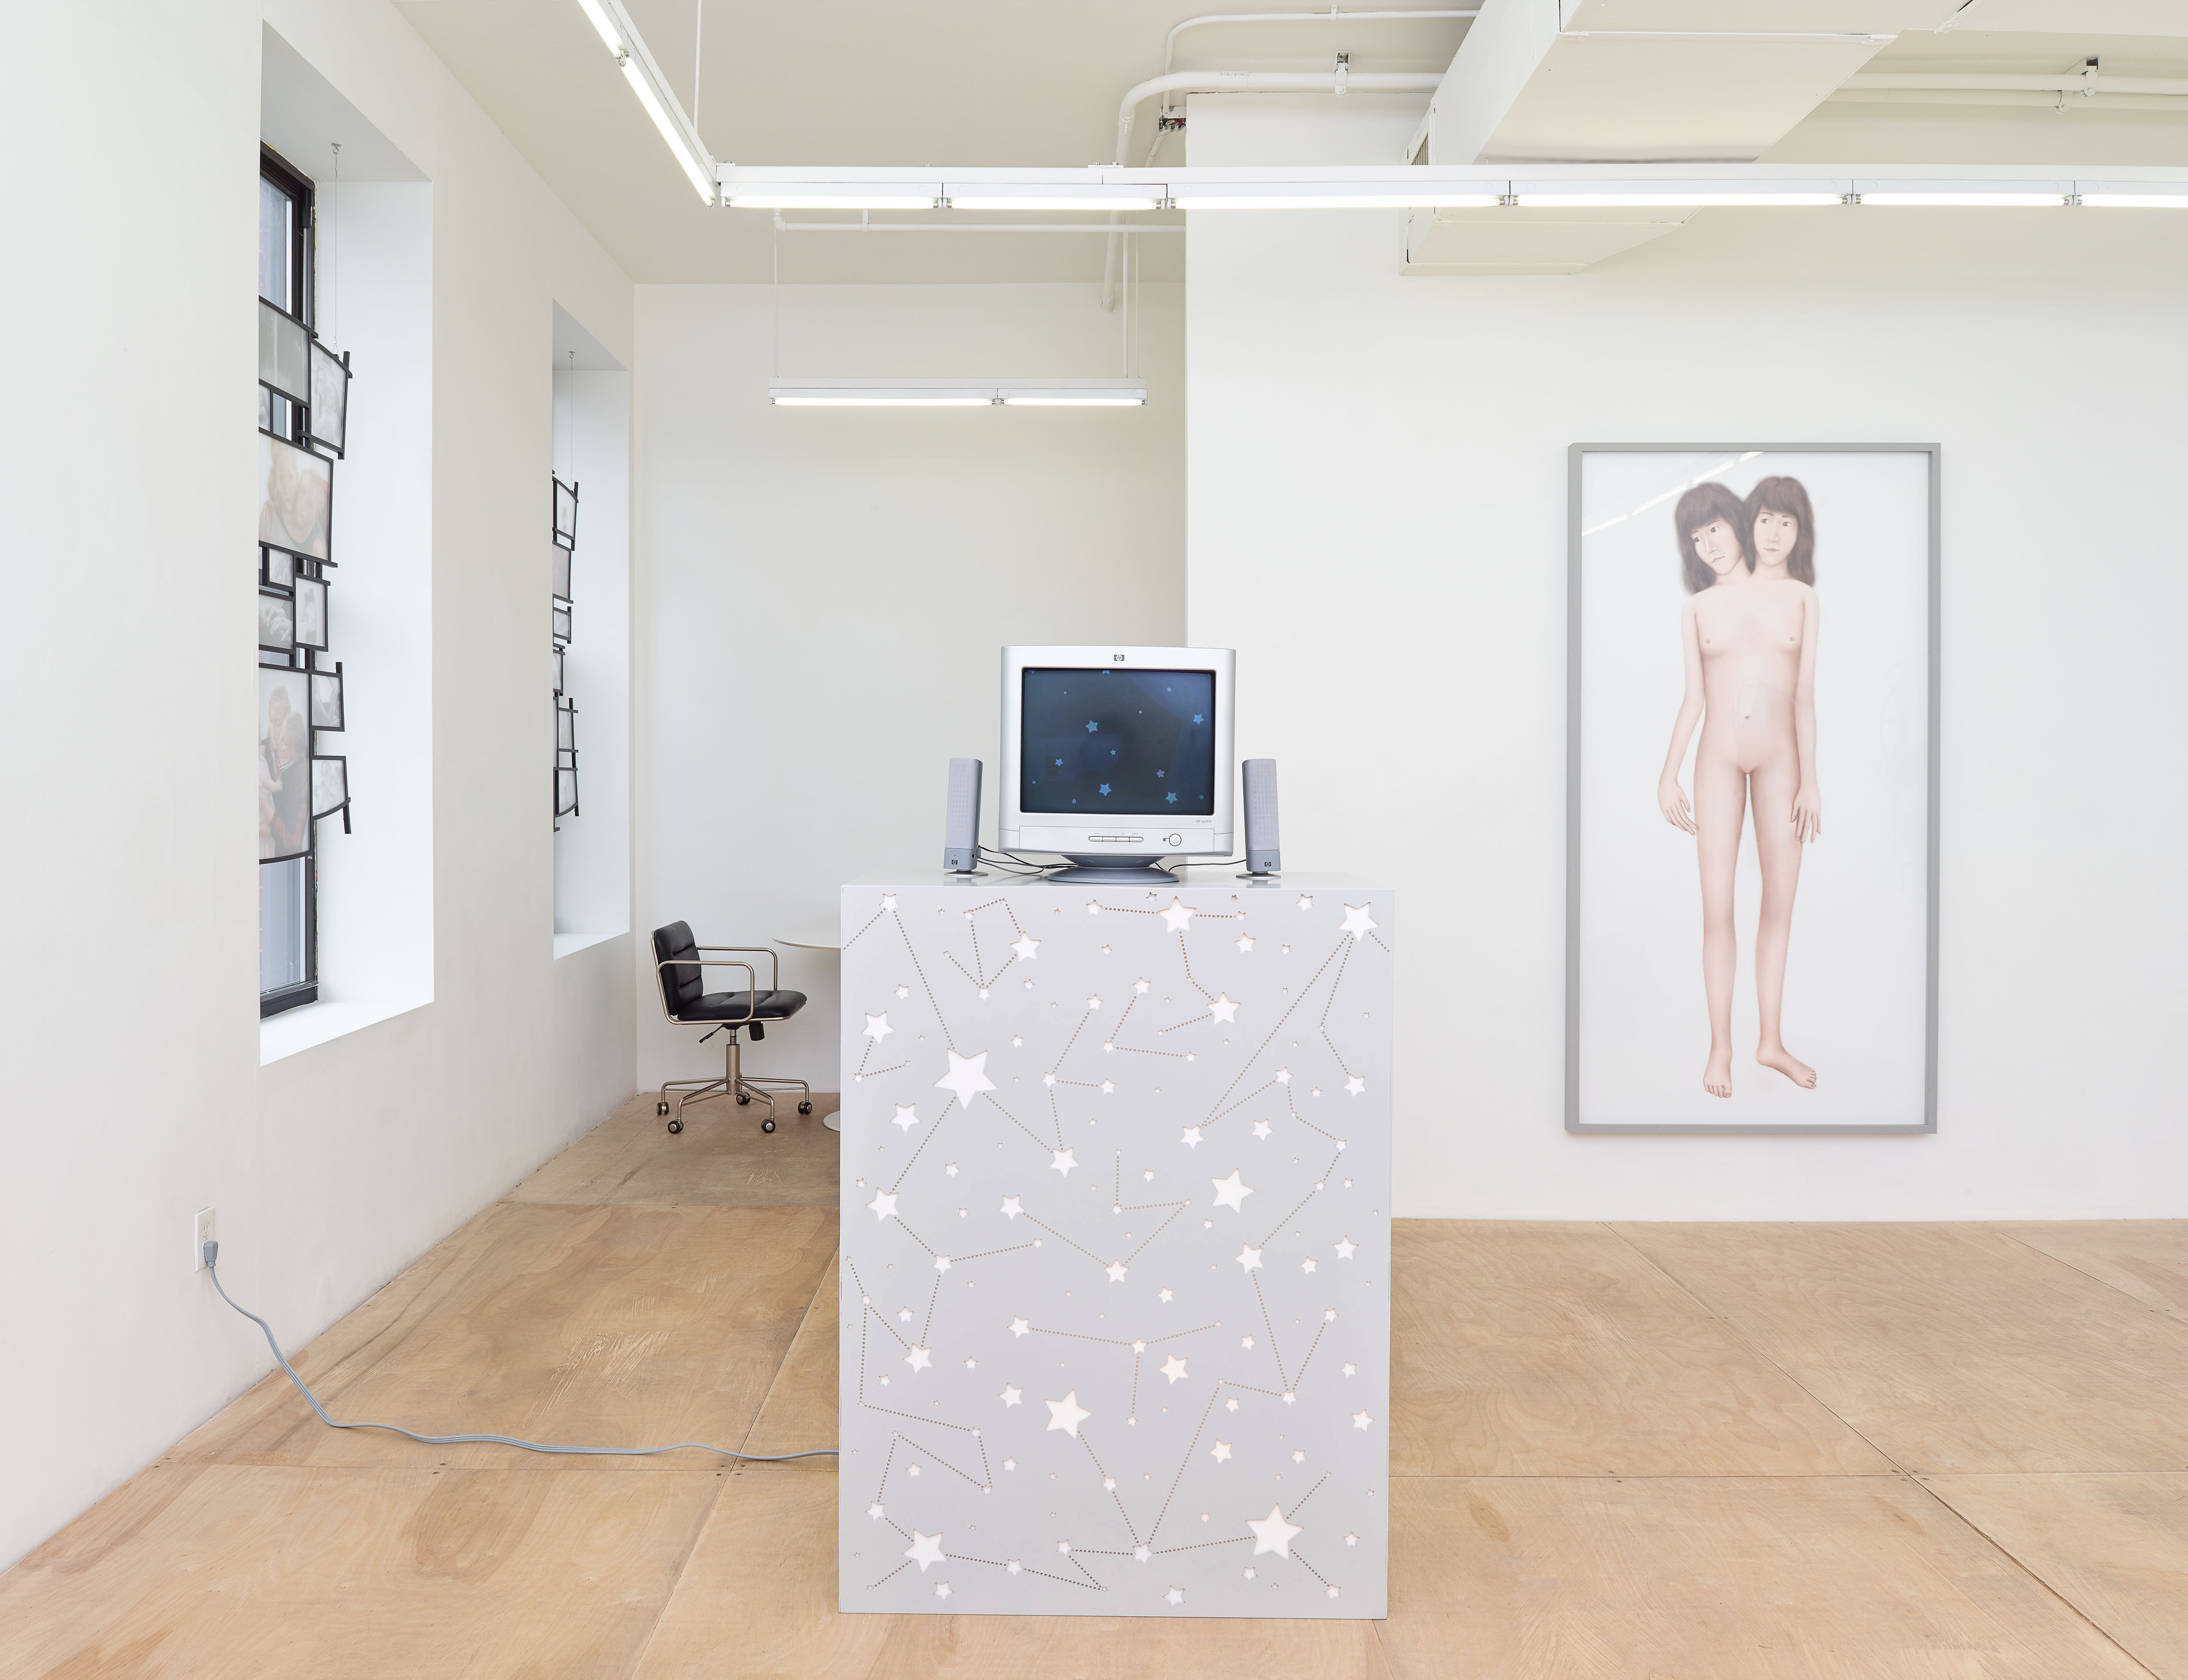 Installation view of "Joined for Life" at Downs & Ross